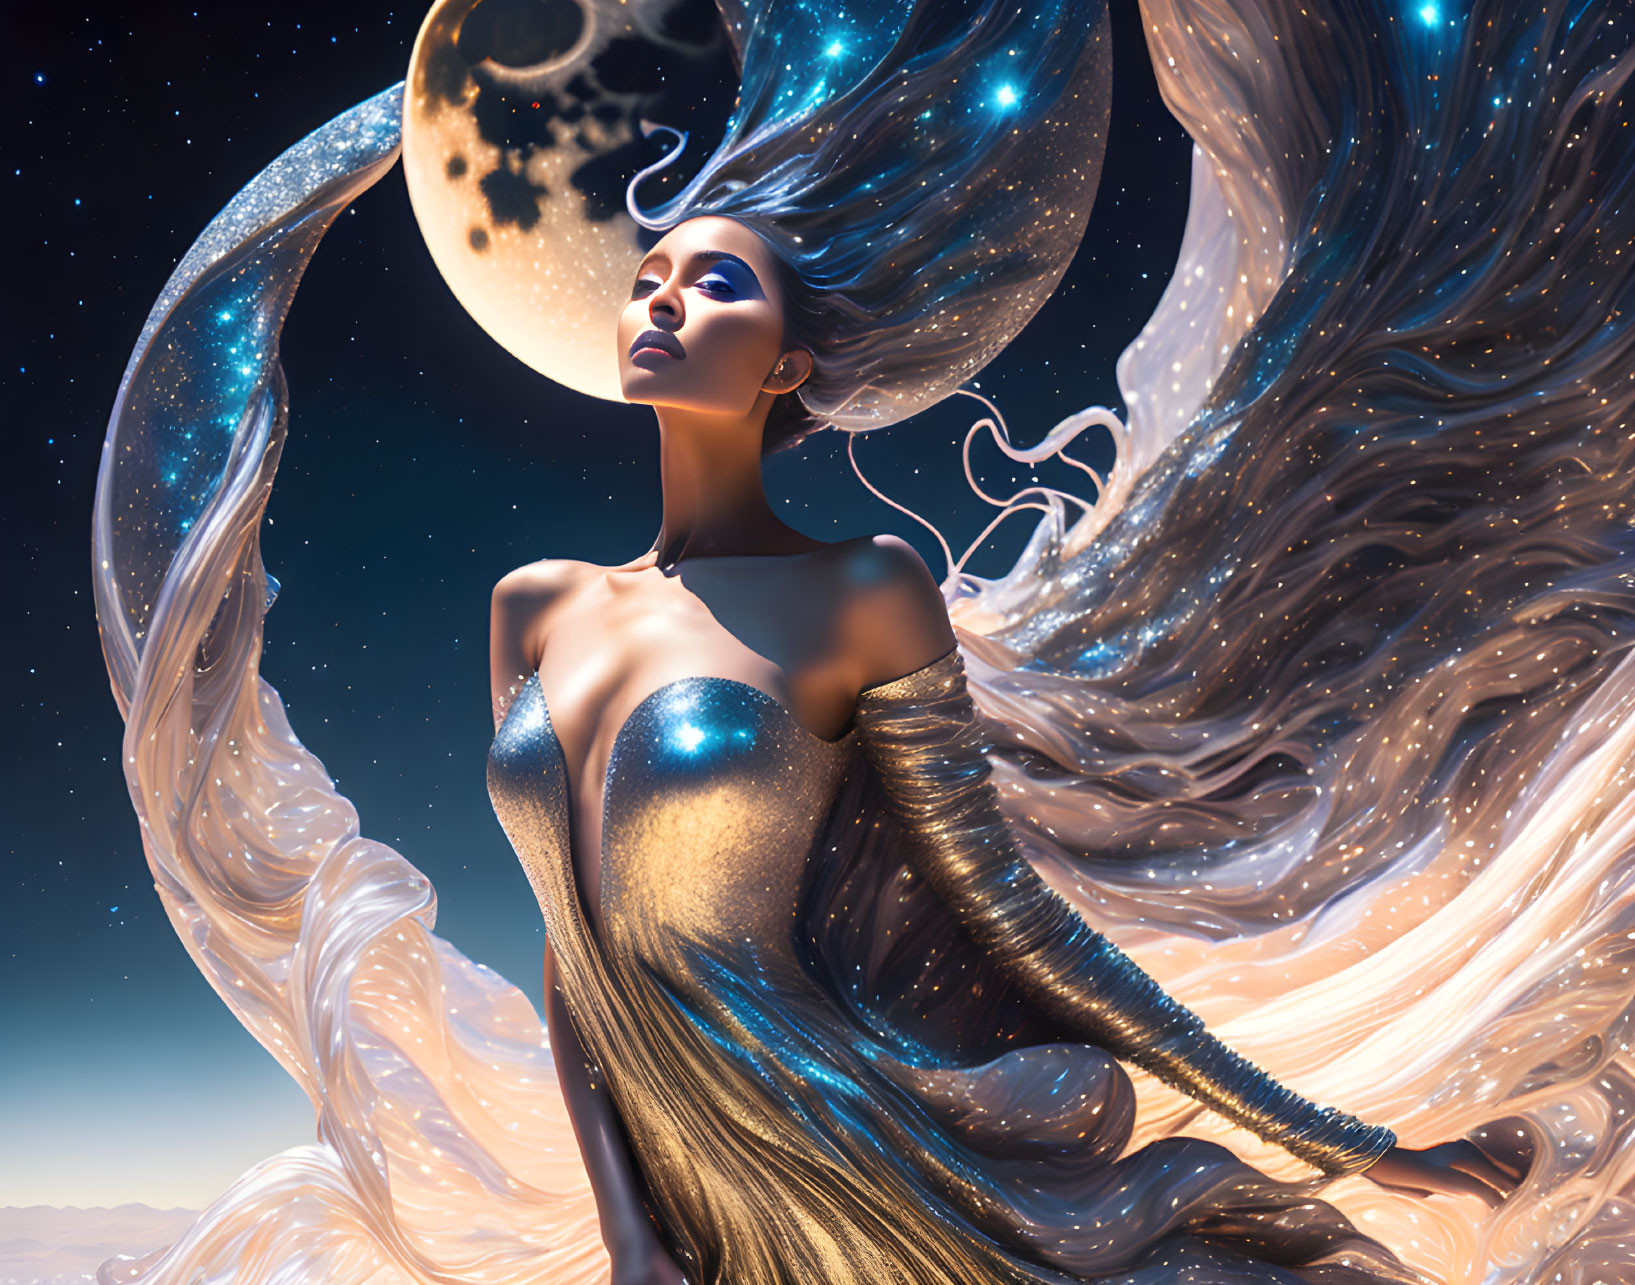 Surreal image: Woman merged with cosmic elements and galaxy hair